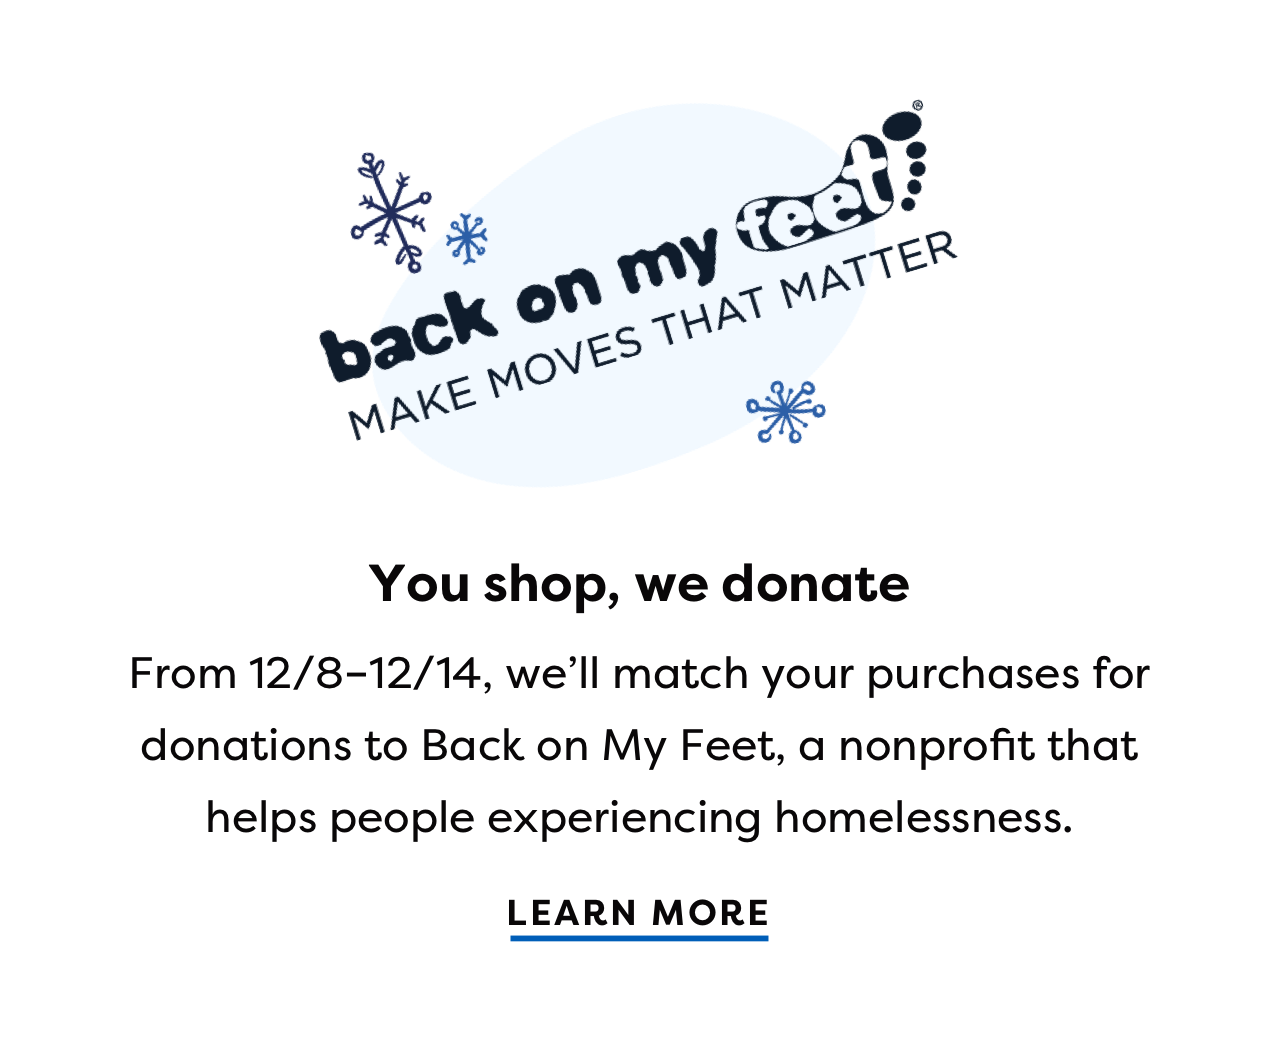 back on my feet! MAKE MOVES THAT MATTER You shop, we donate From 12/8-12/14, we'll match your purchases for donations to Back on My Feet, a nonprofit that helps people experiencing homelessness. LEARN MORE